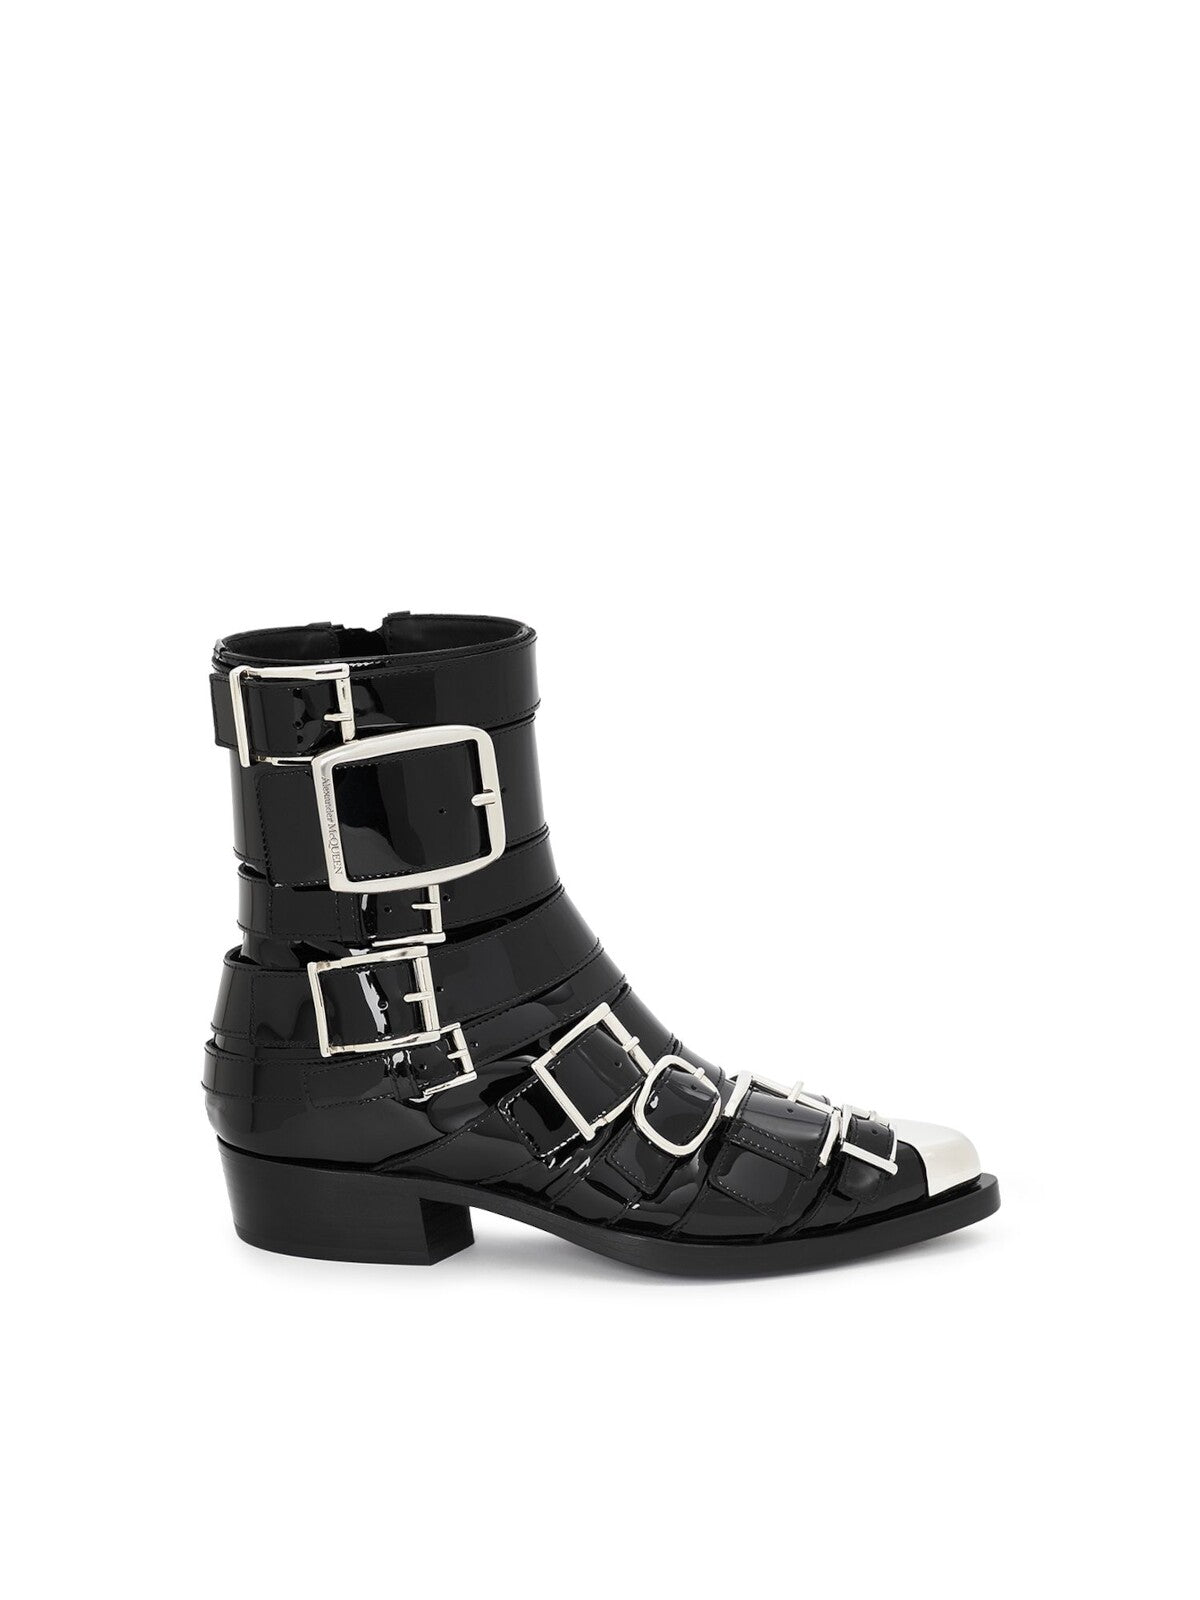 ALEXANDER MCQUEEN Womens Black Silver Toe Cap Strappy Buckle Accent Pointed Toe Block Heel Zip-Up Leather Boots Shoes 38.5